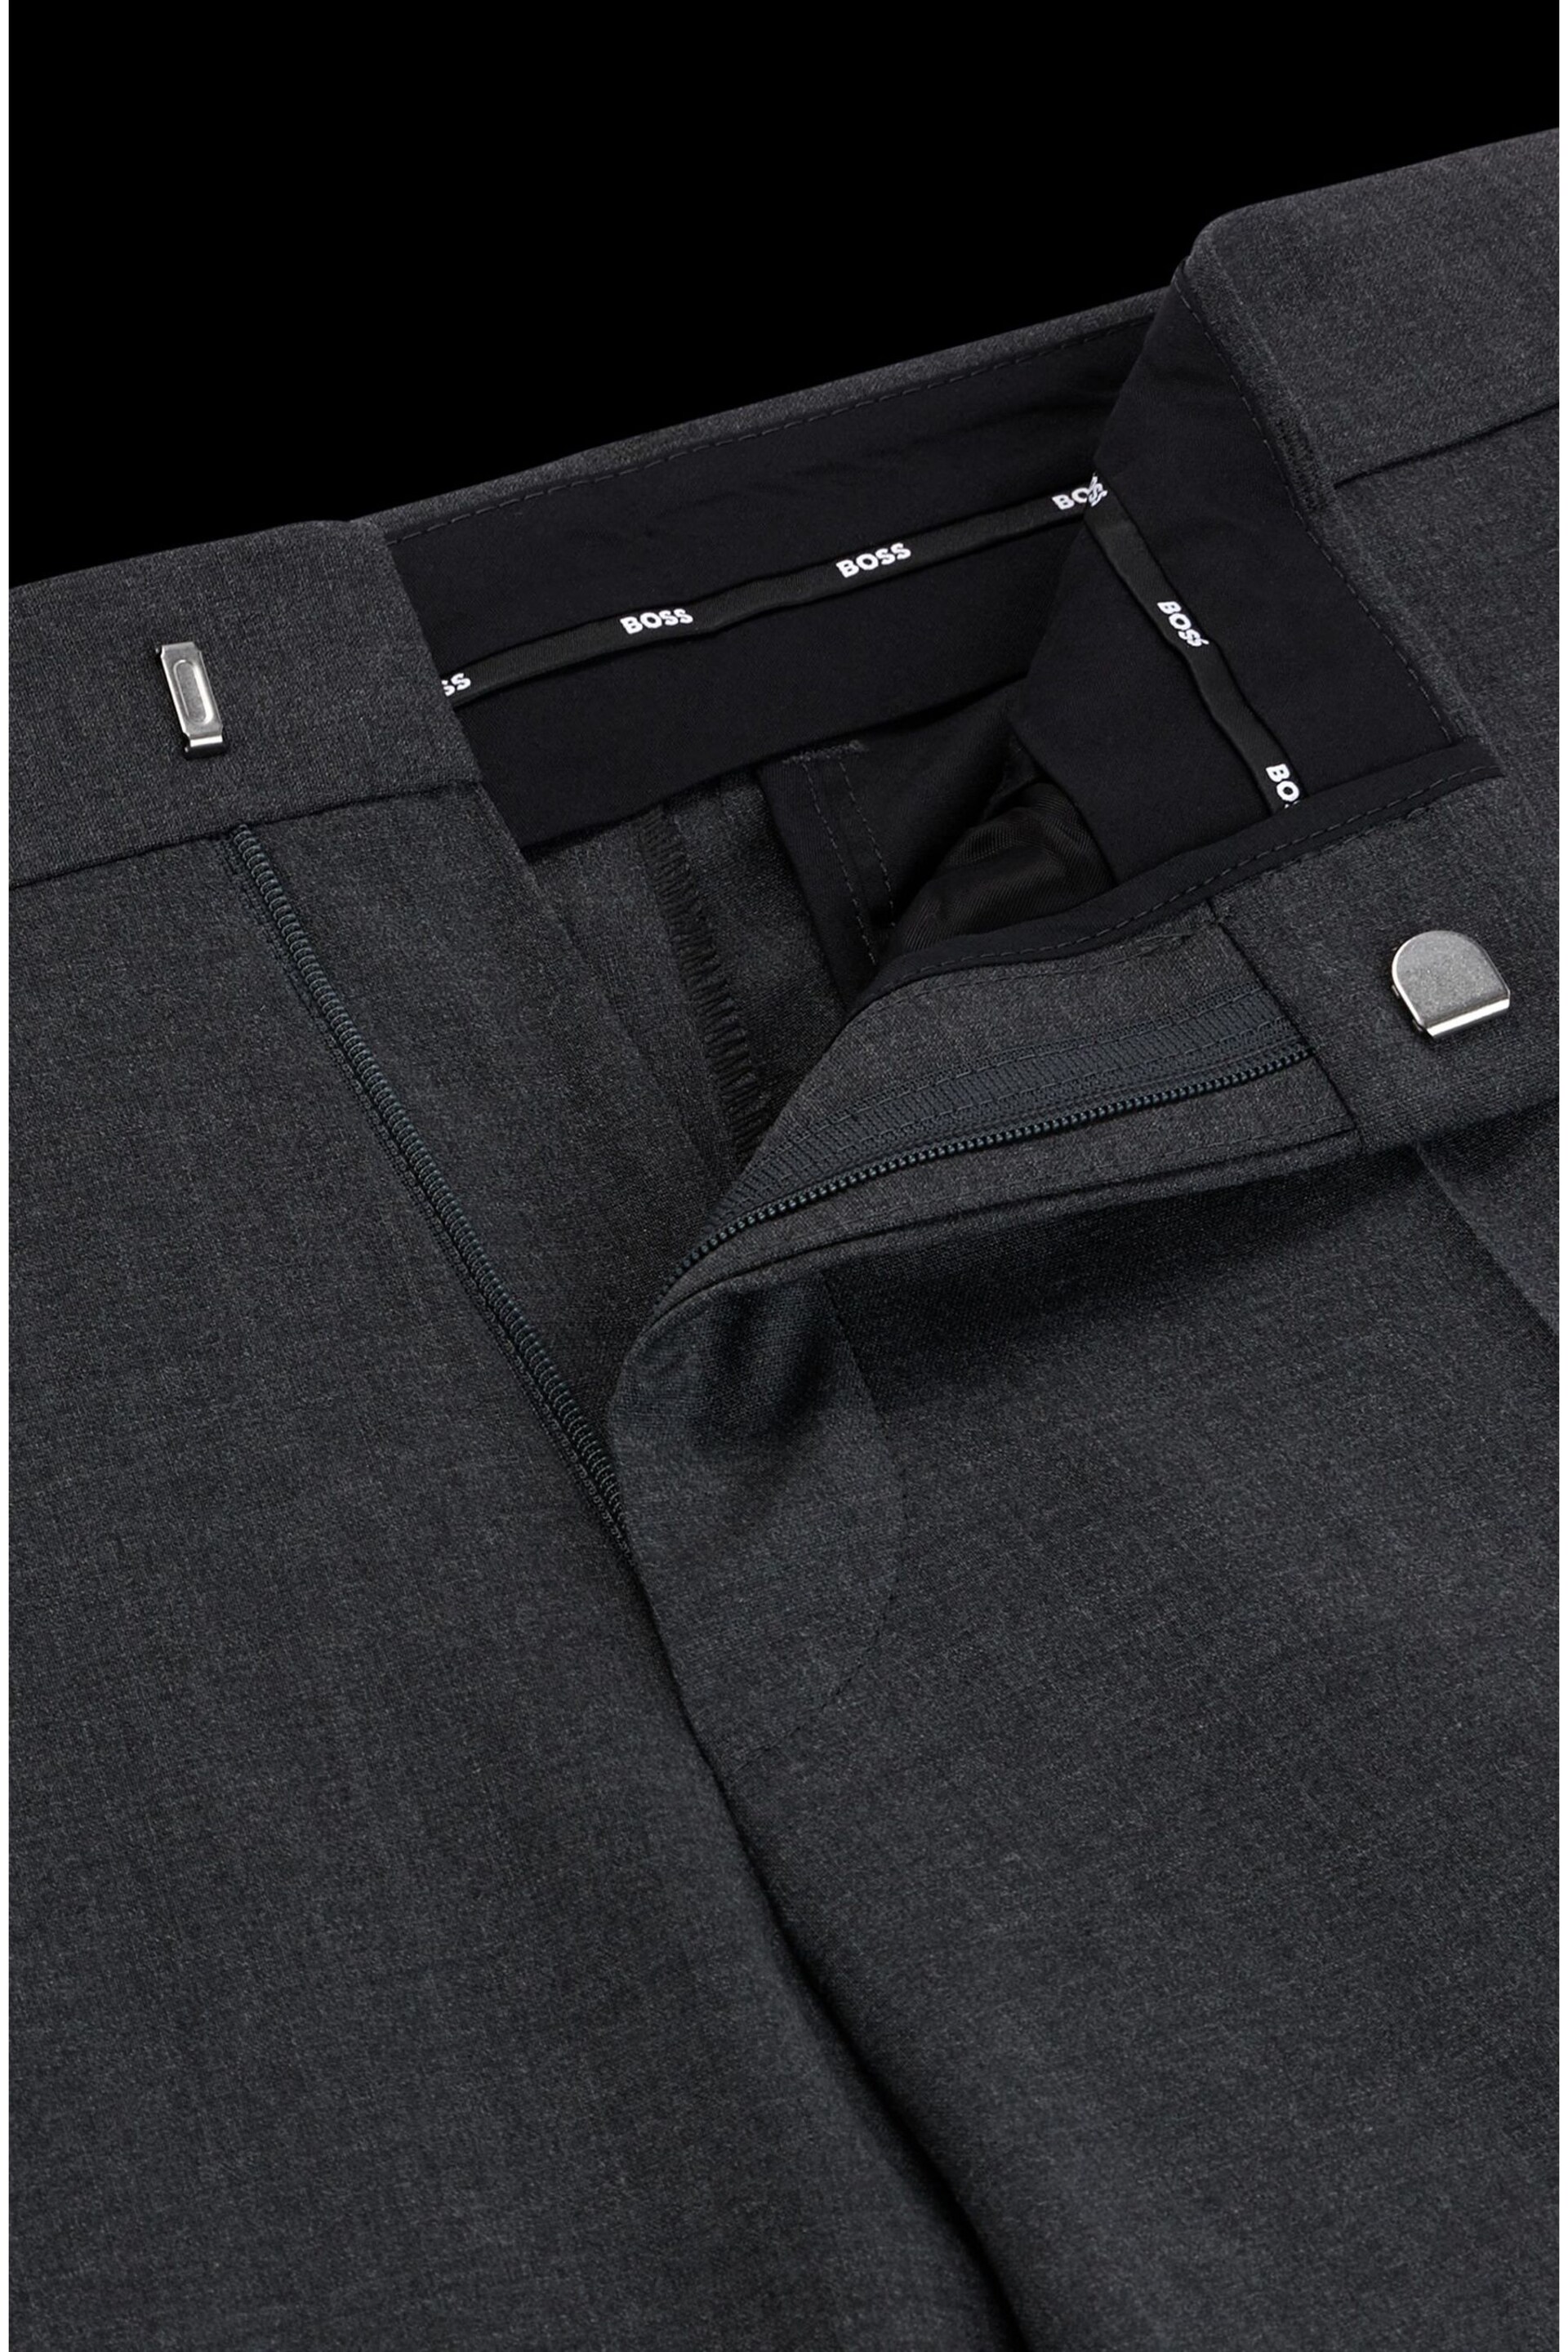 BOSS Grey Slim Fit Suit :Trousers - Image 4 of 6